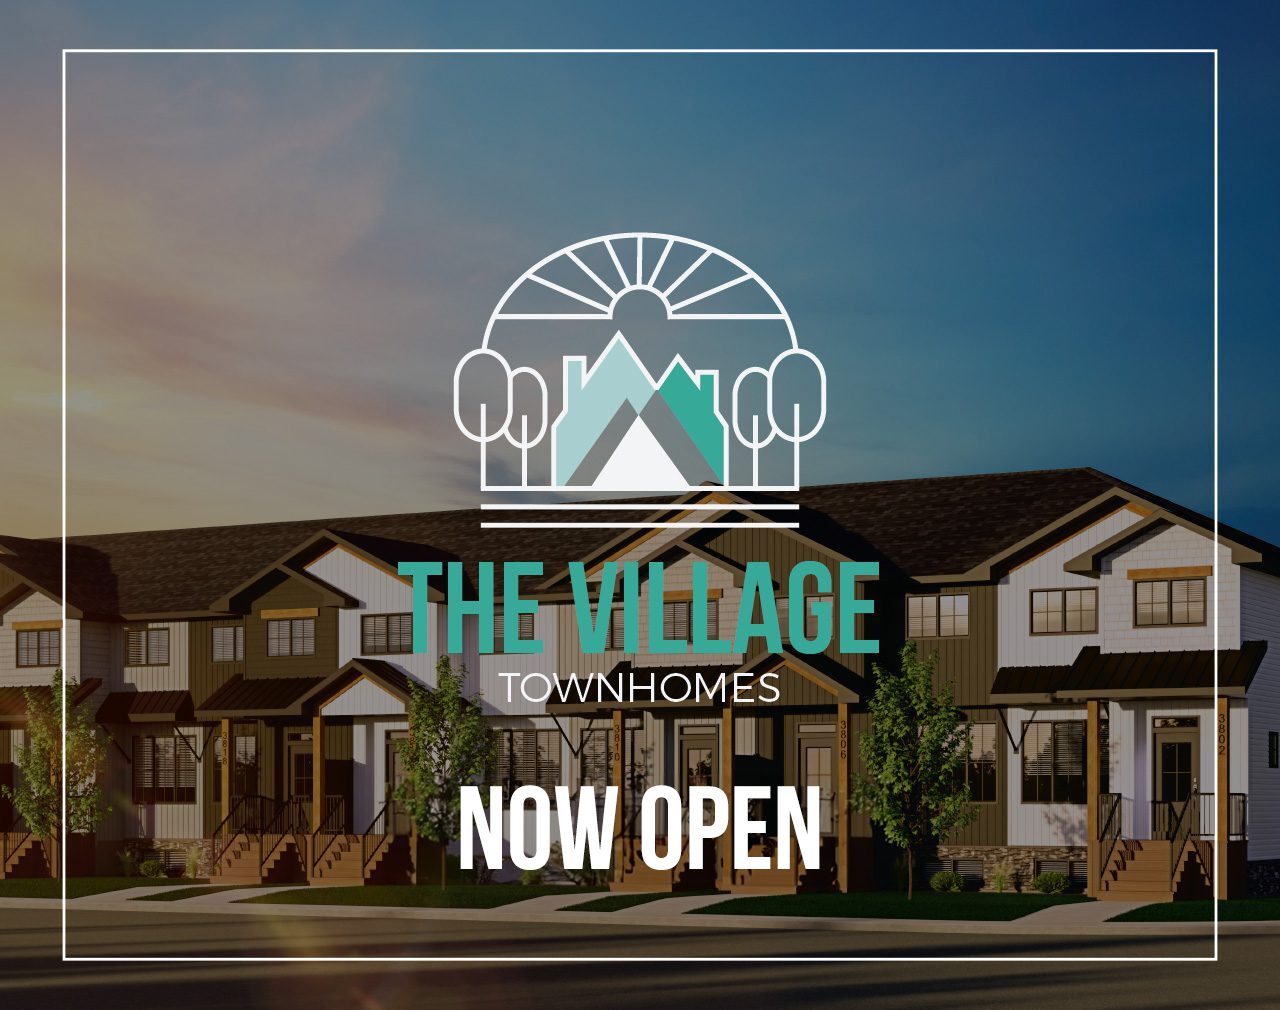 The village townhomes now open.